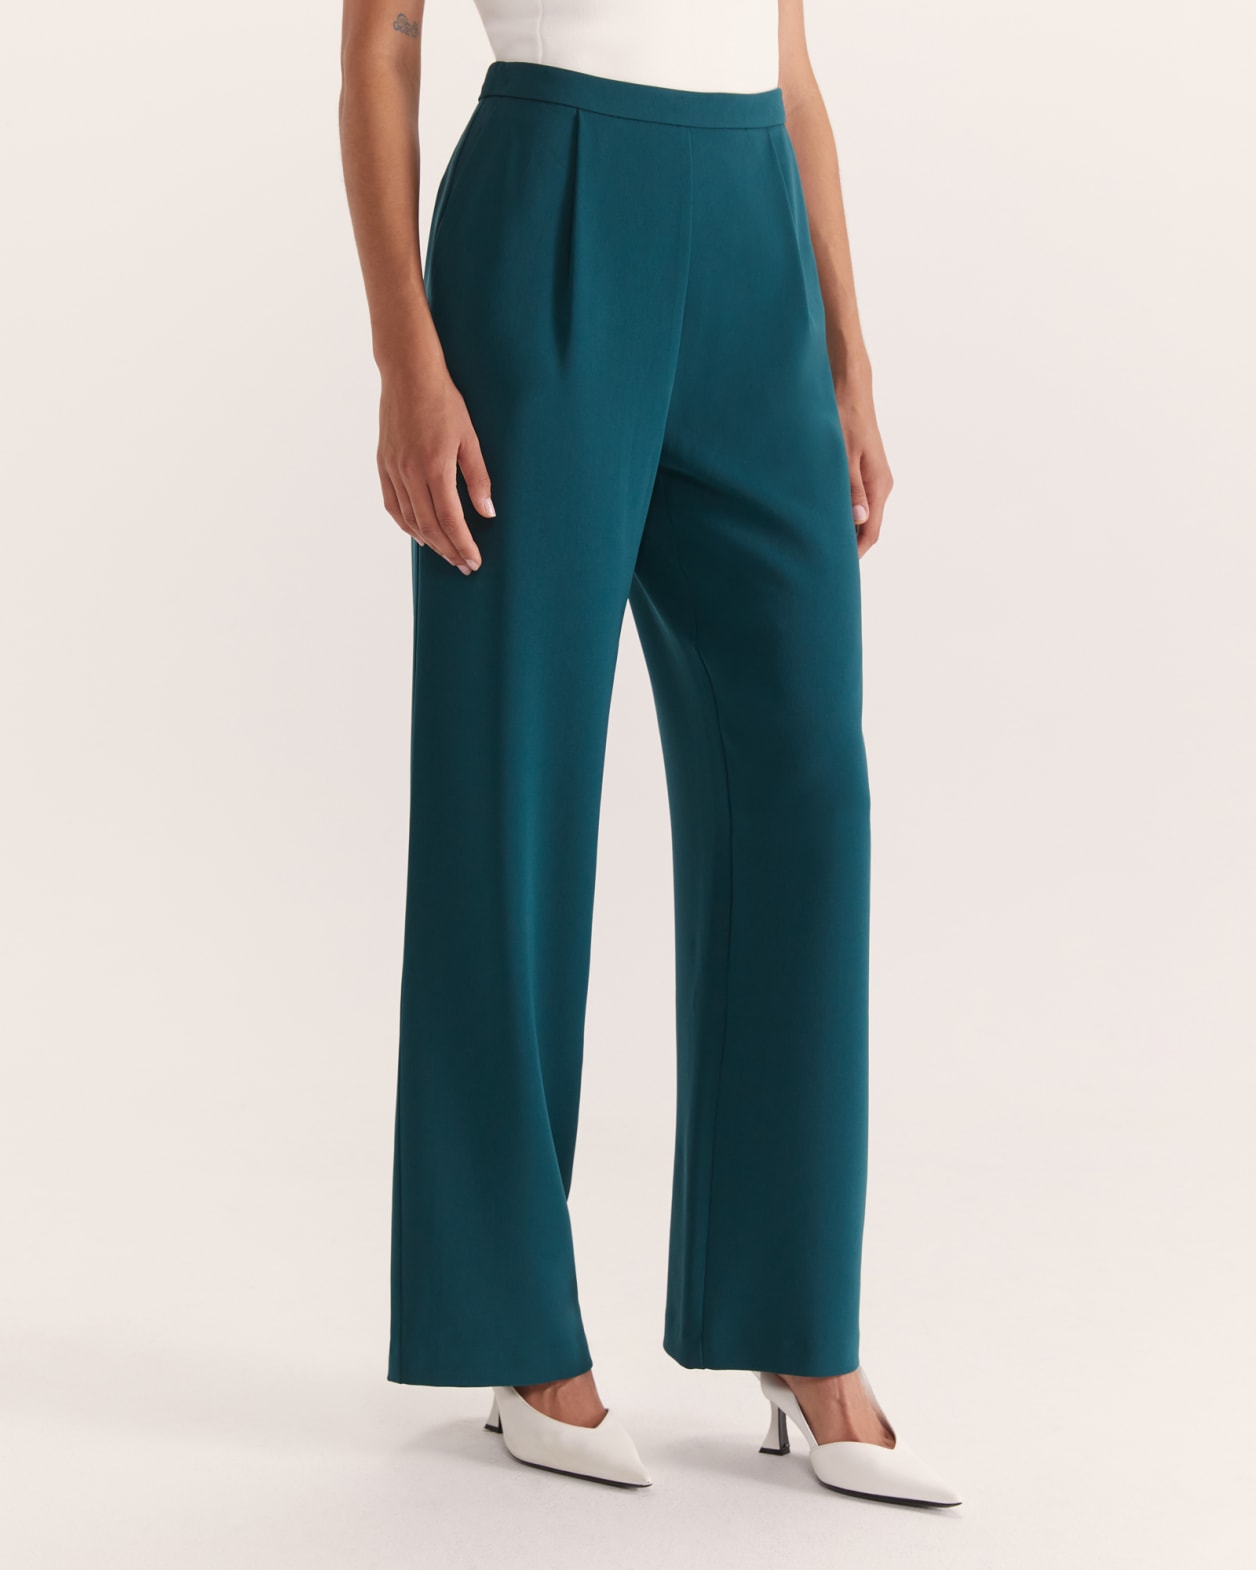 Astra Wide Leg Pant in TEAL